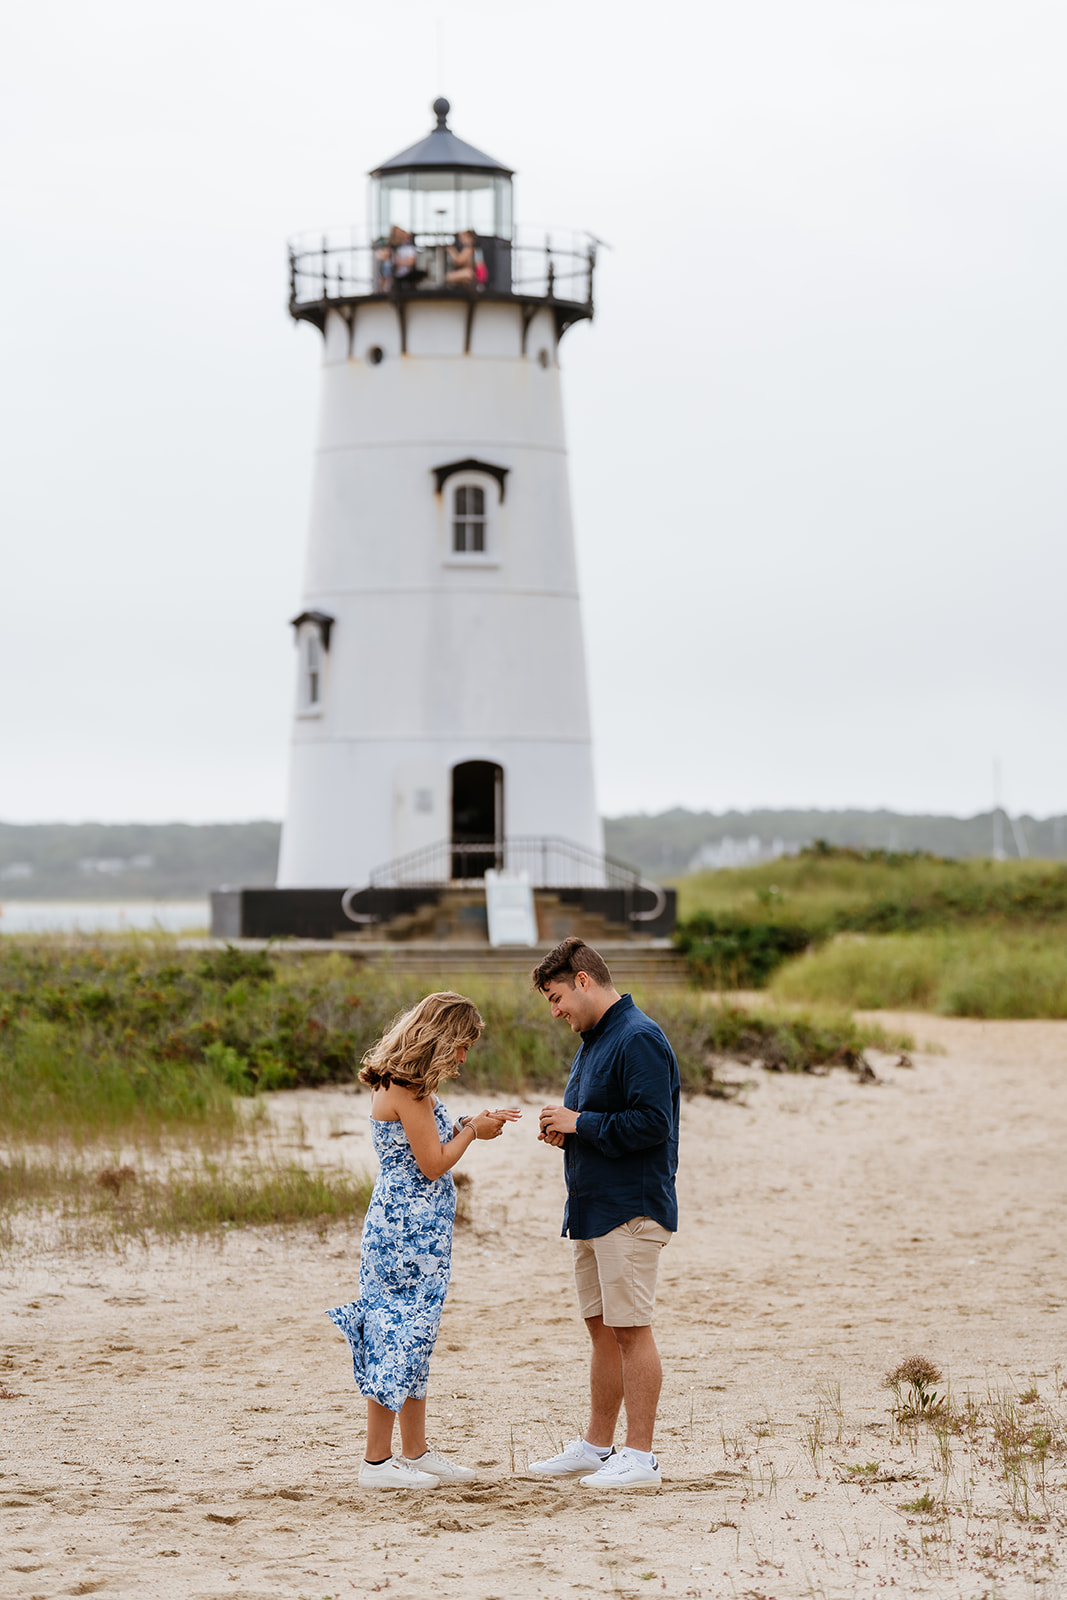 Man proposing to woman on one knee on sandy beach with Edgartown Harbor Lighthouse in the background.